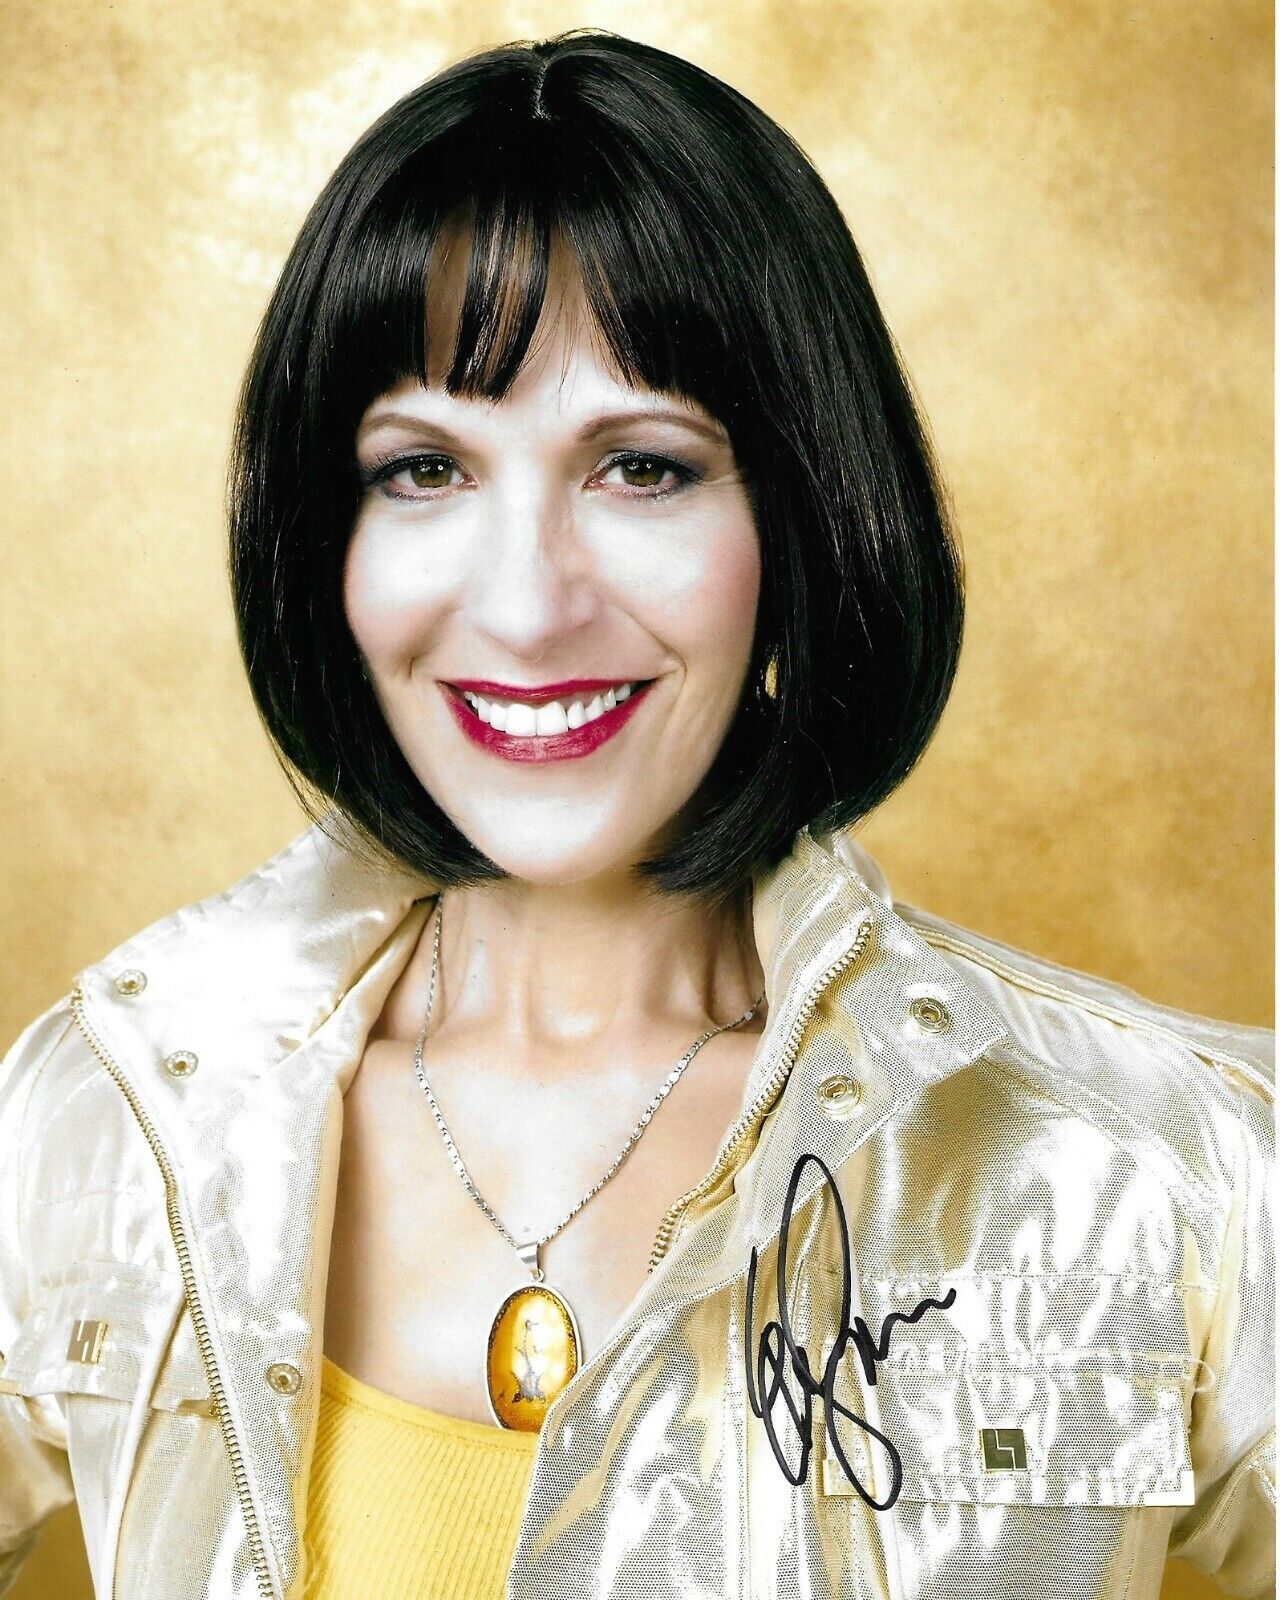 Ellen Greene Signed Pushing Daisies 10x8 Photo Poster painting AFTAL